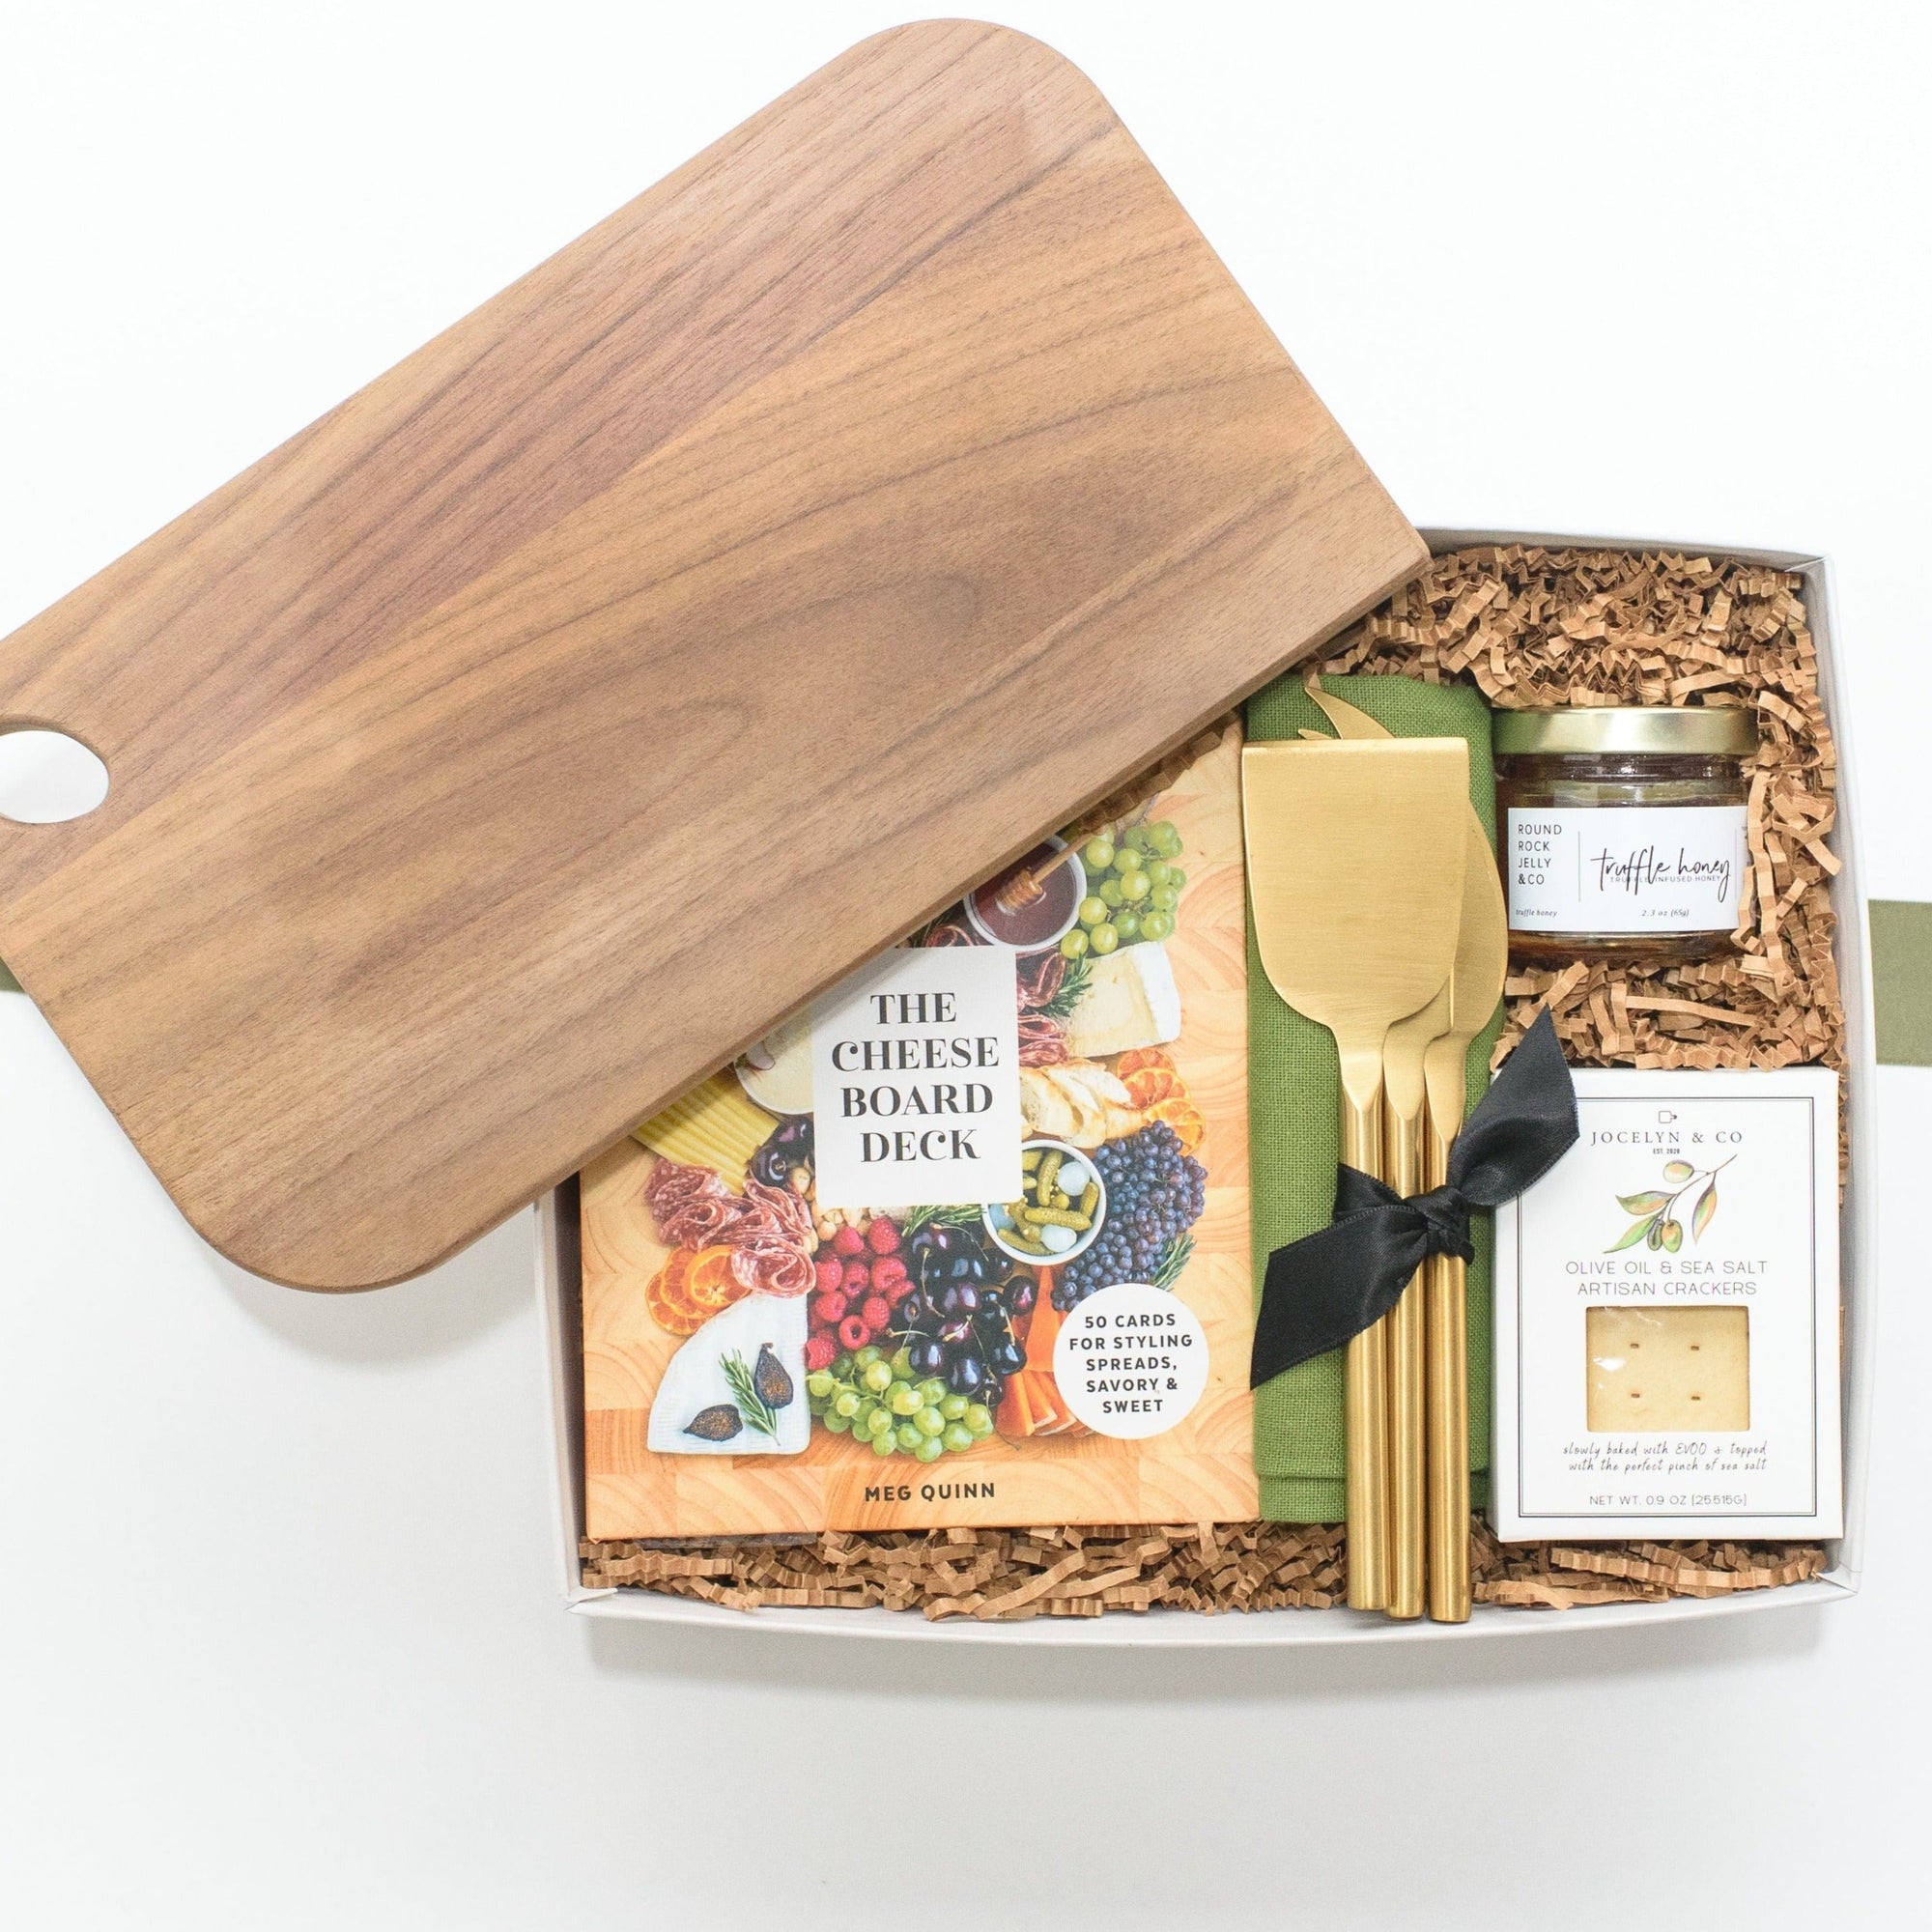 Charcuterie Gift Box with Serving Board, Cheese Knives, Linen Tea Towel, Cheese Board Deck Inspiration Cards, Honey and Crackers. Hostess thank you gifts, realtor closing gifts, settlement gifts, client gifting, corporate gifting.